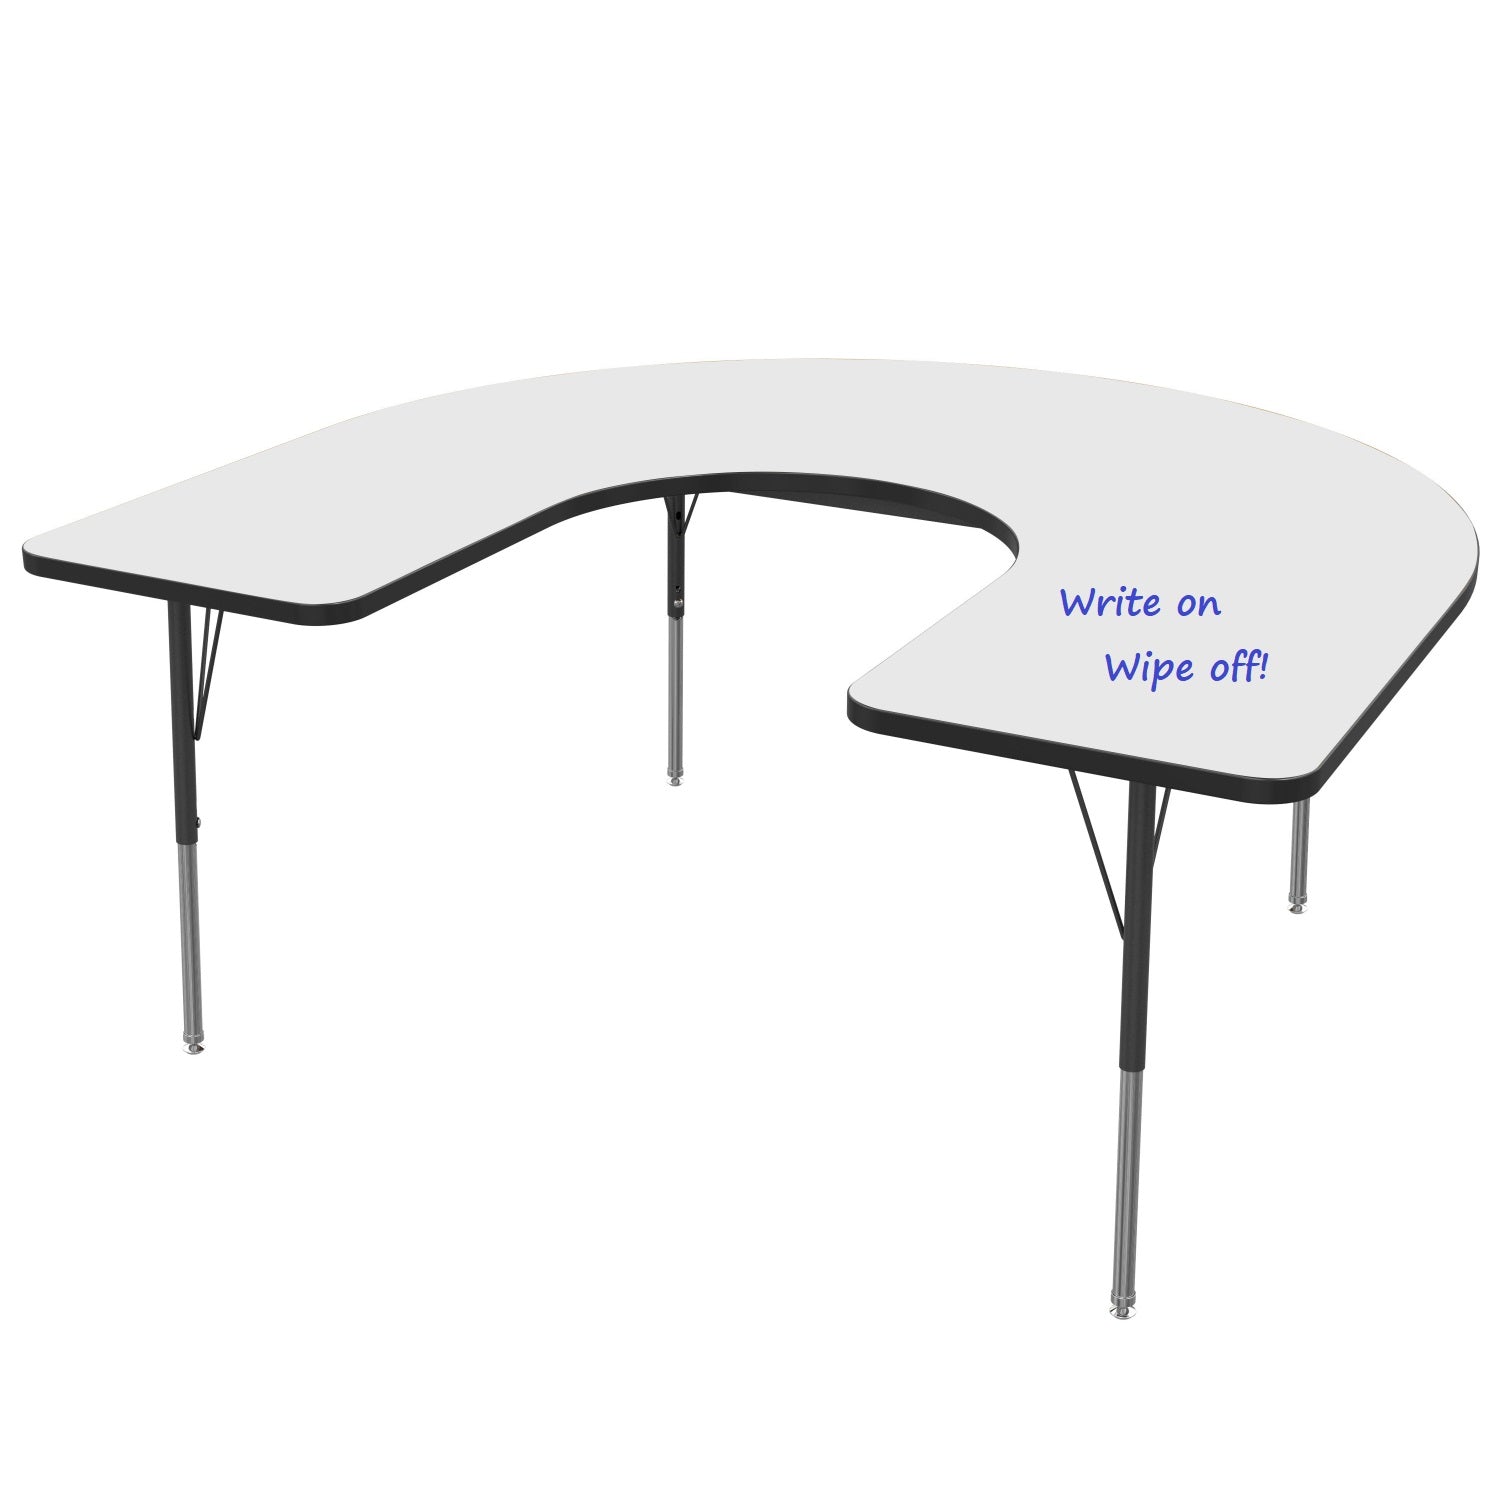 Companion 66Wx60D Horseshoe Activity Table w/ Markerboard Top -  CAT-6066-M